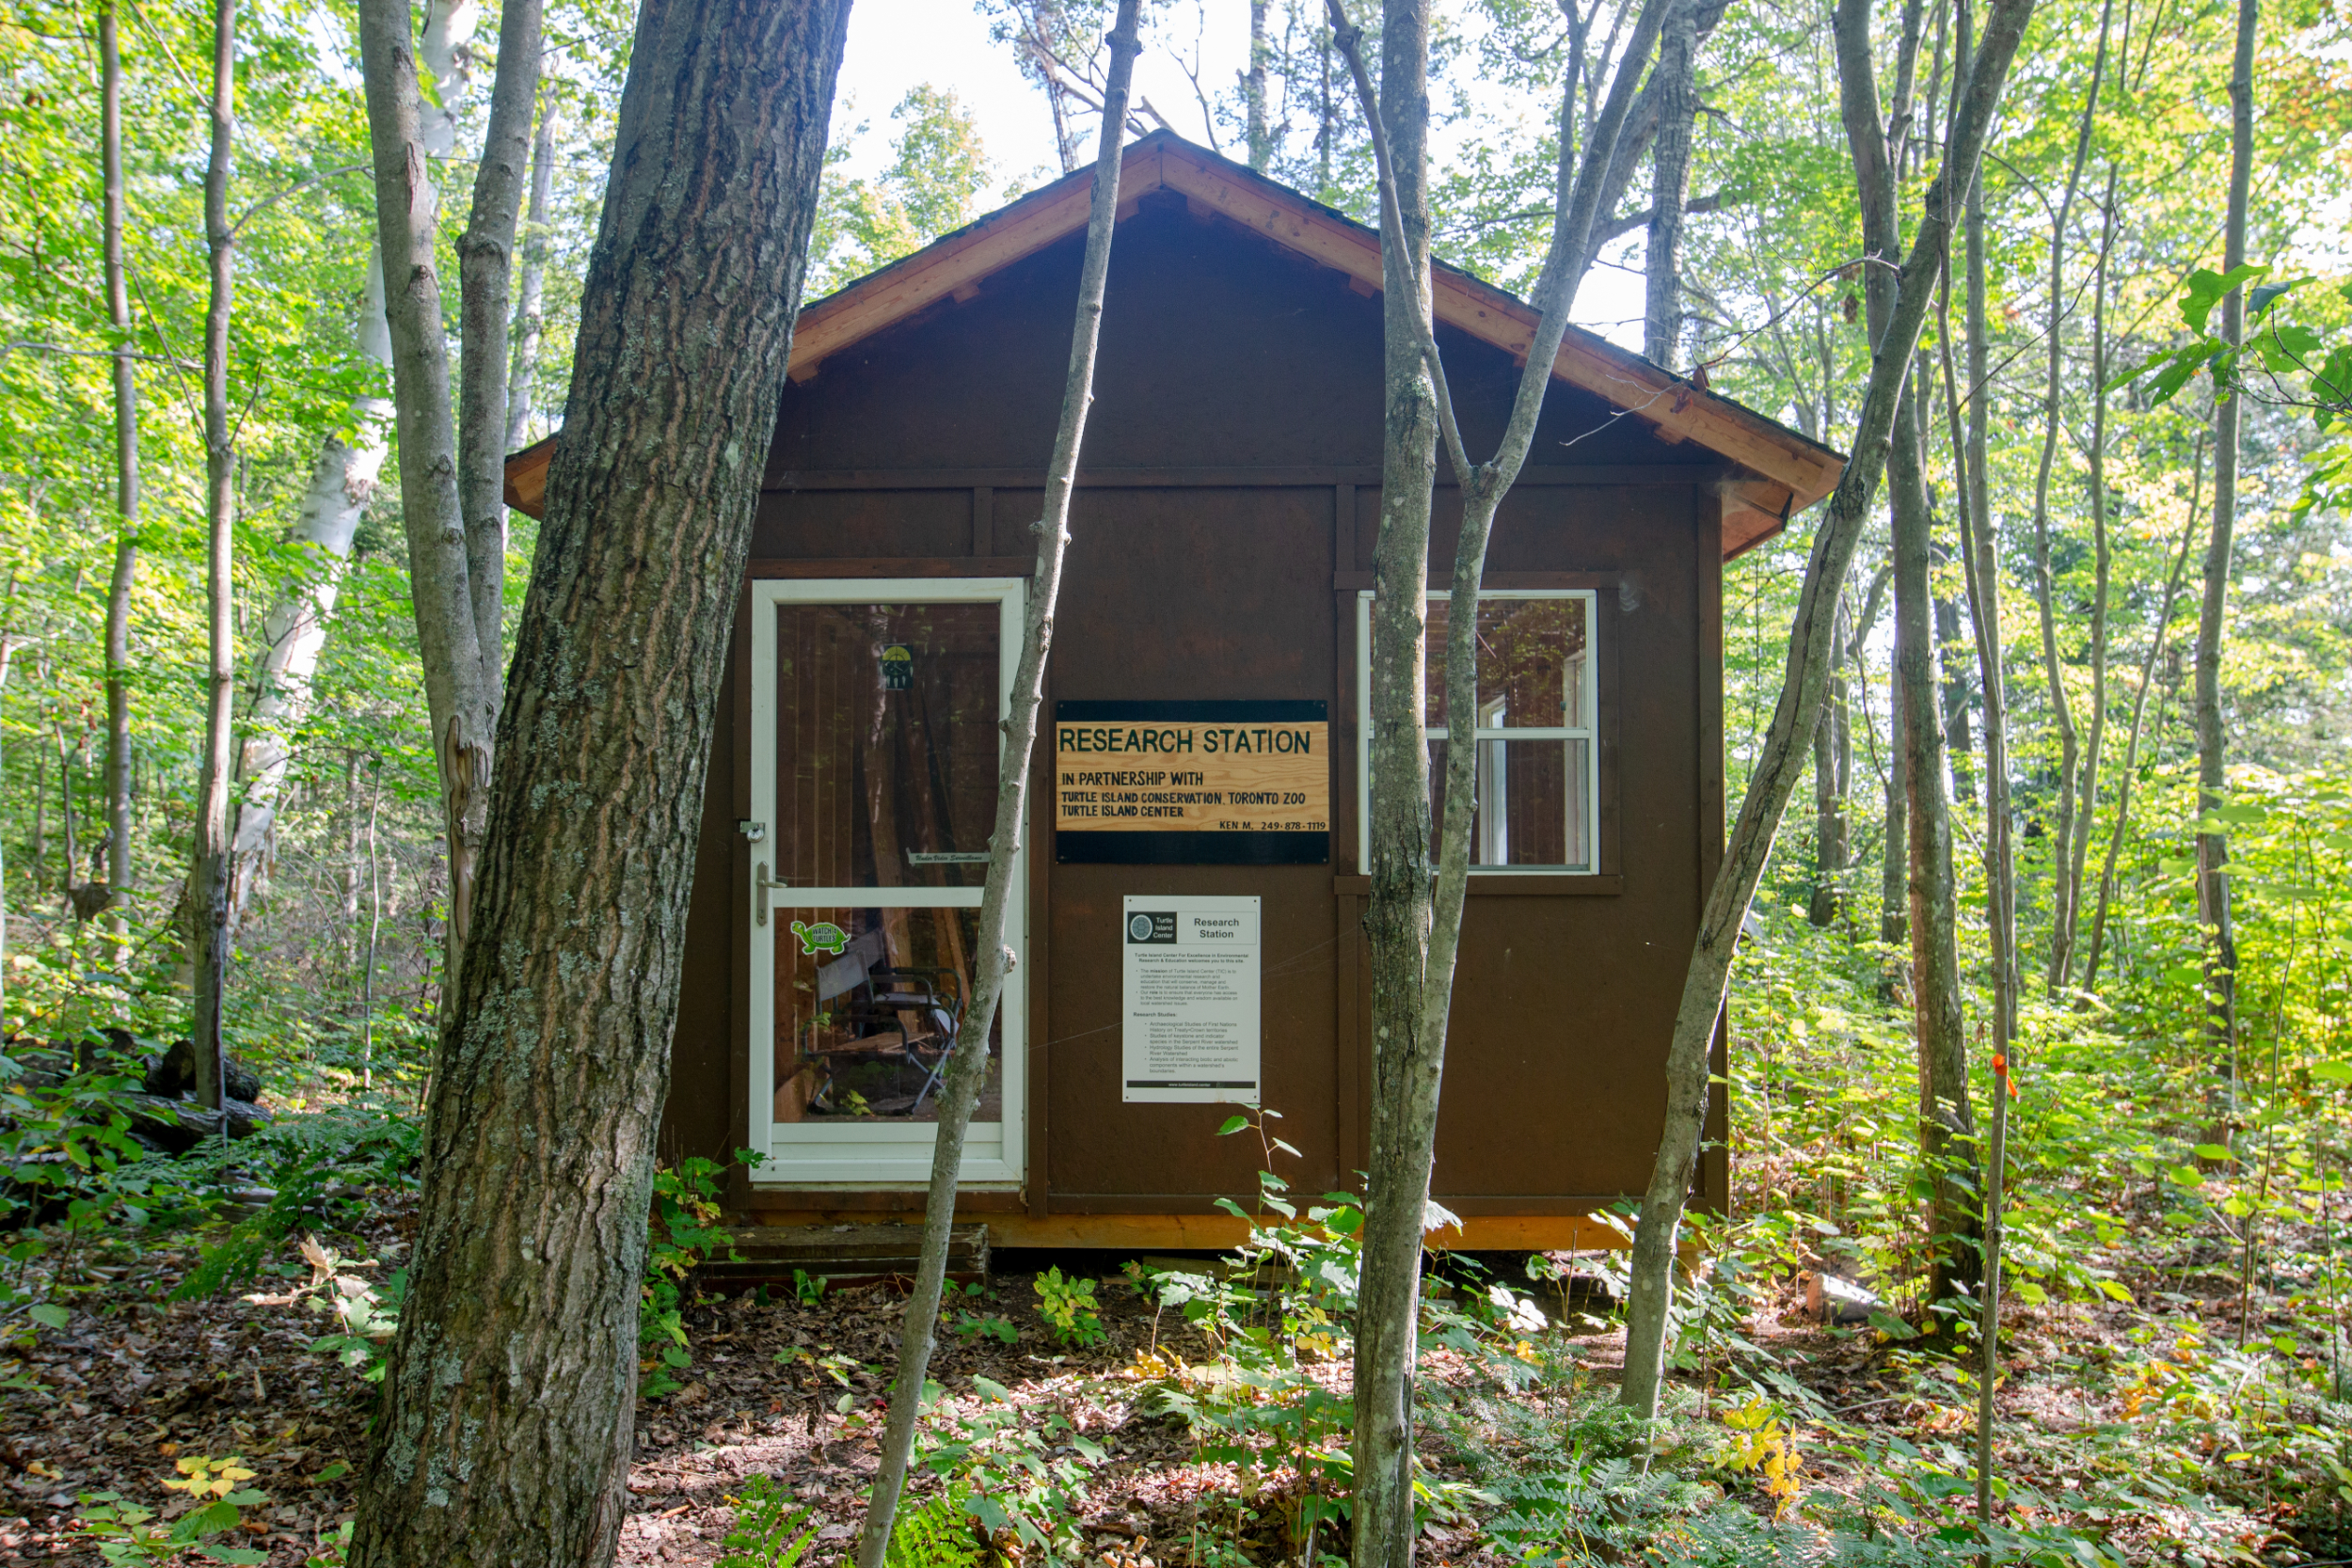 A small cabin in the forest with a sign on it, reading "Research station"